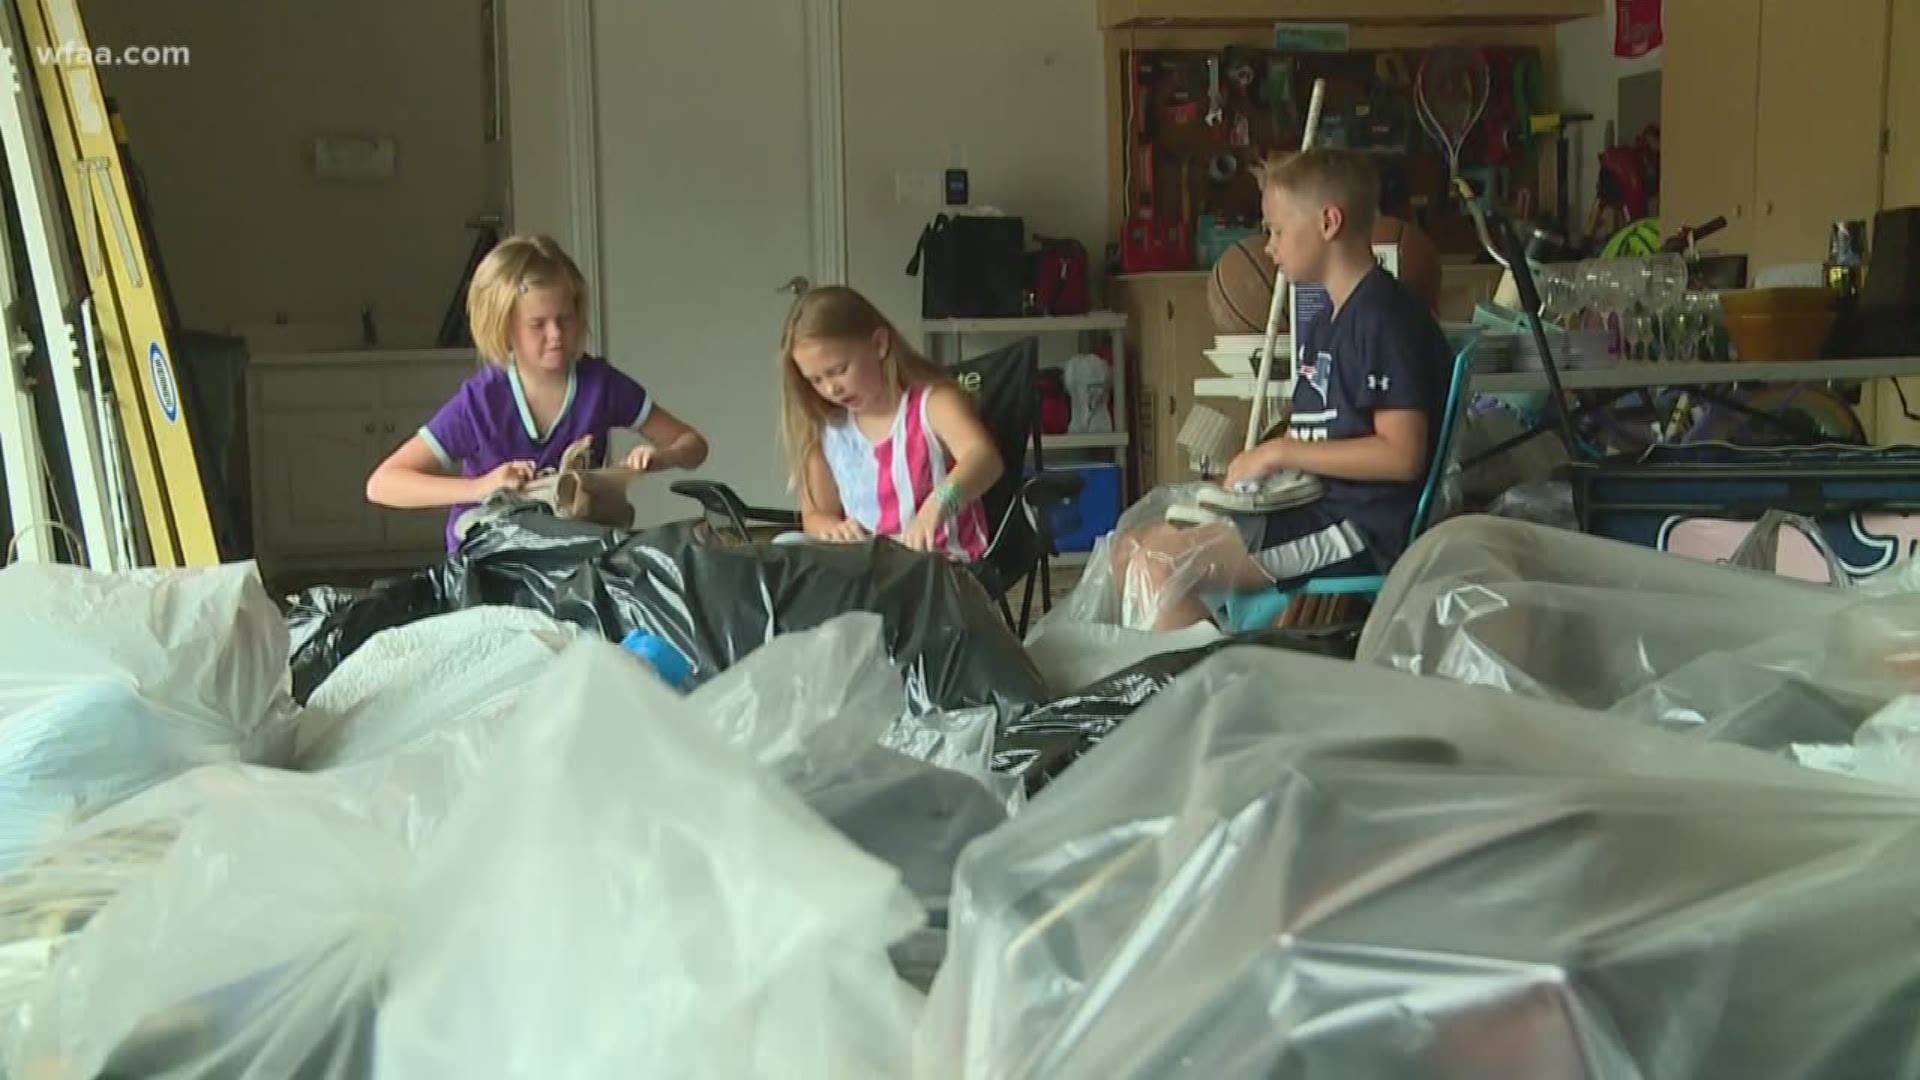 Siblings spend summer learning the value of giving back: Shoe drive helps kids across the world